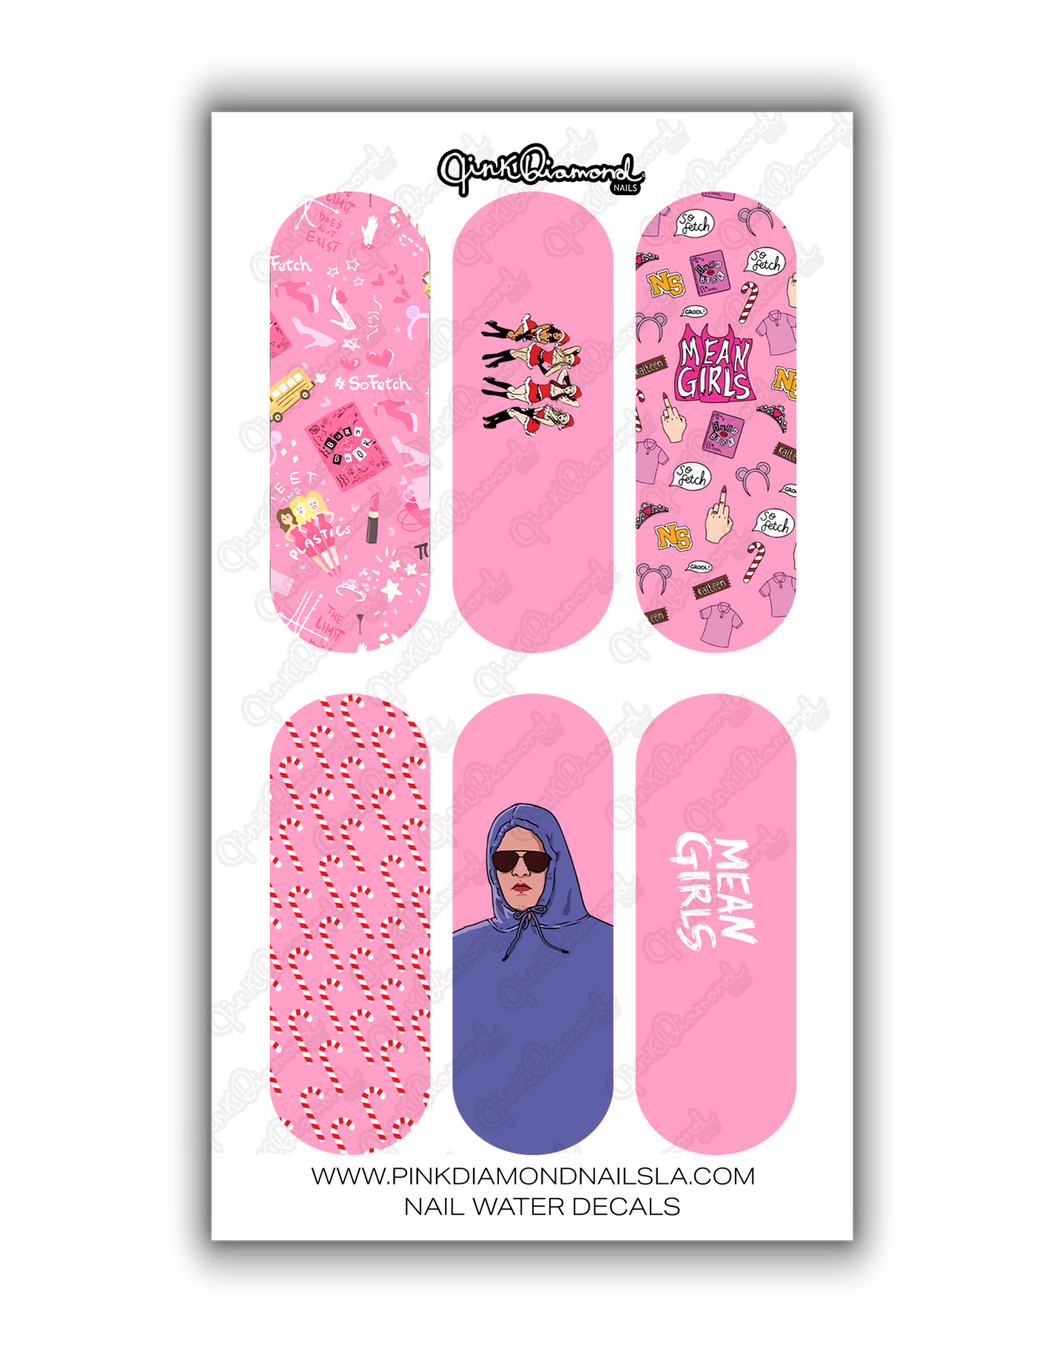 Nail water decals- XL Mean girls Collection